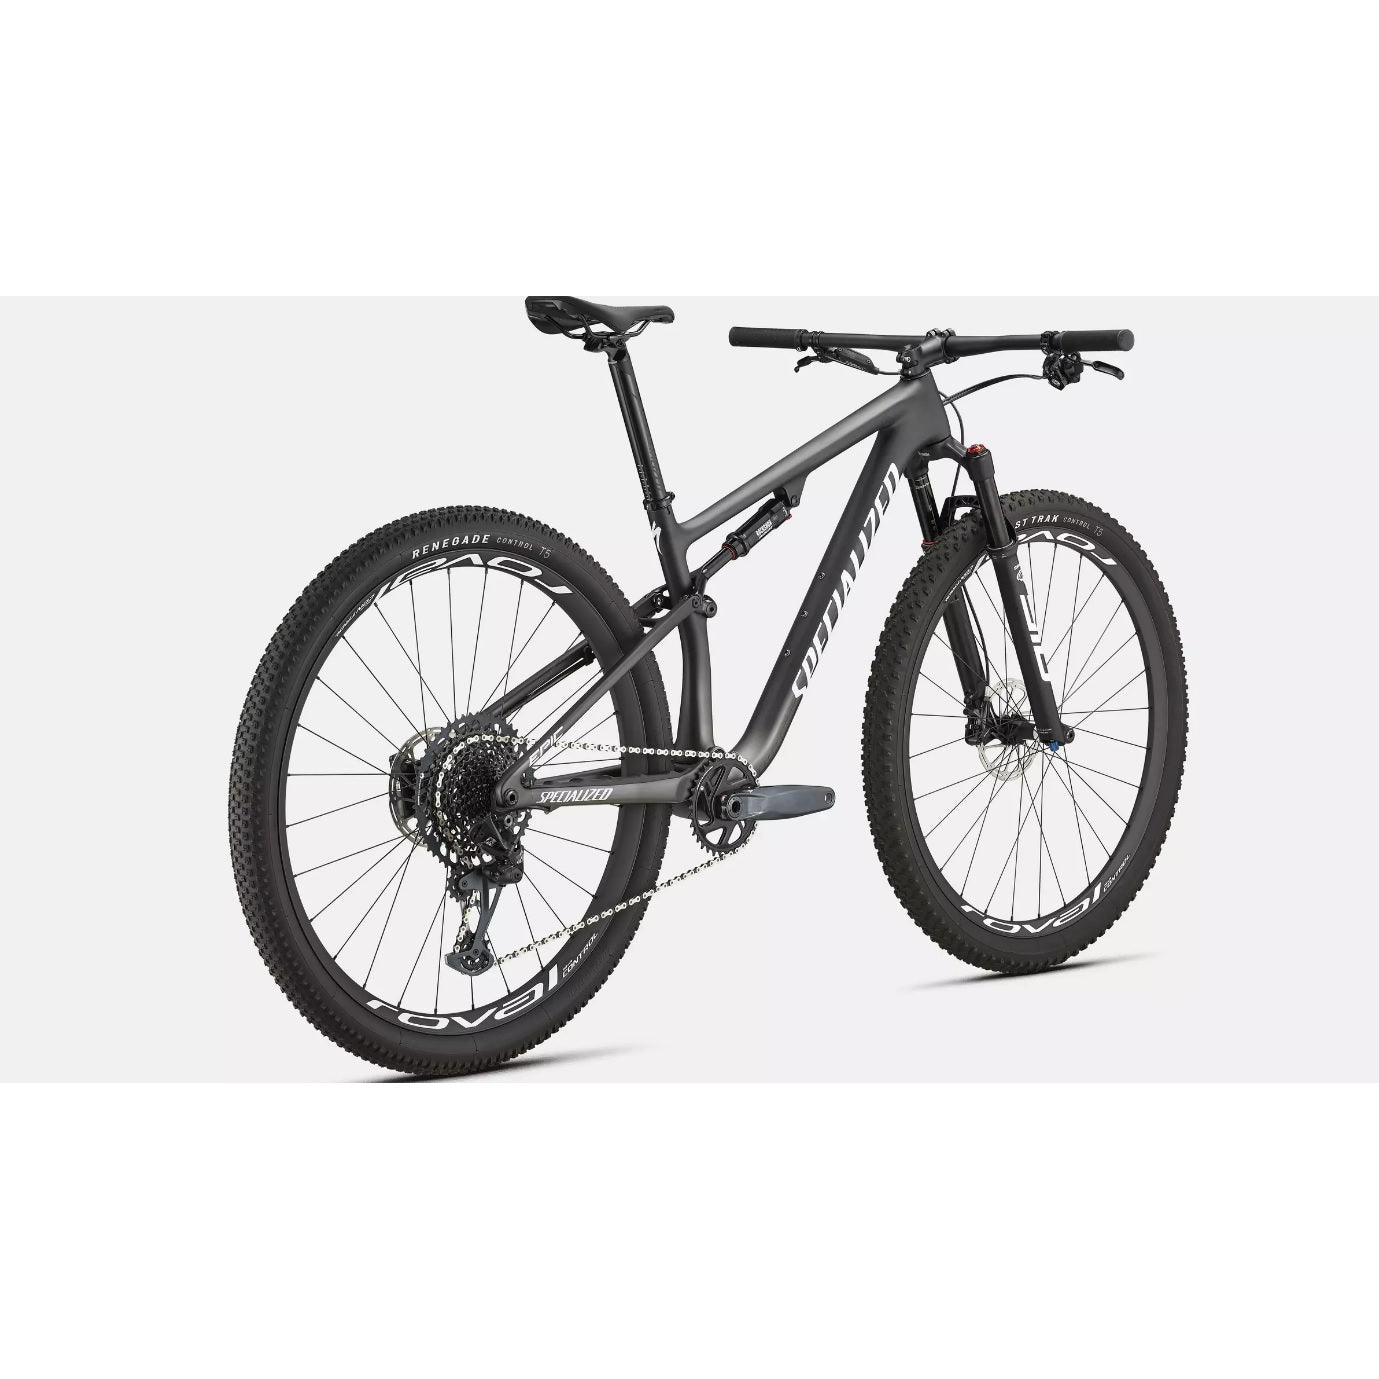 Specialized Epic Expert Full Suspension Mountain Bike